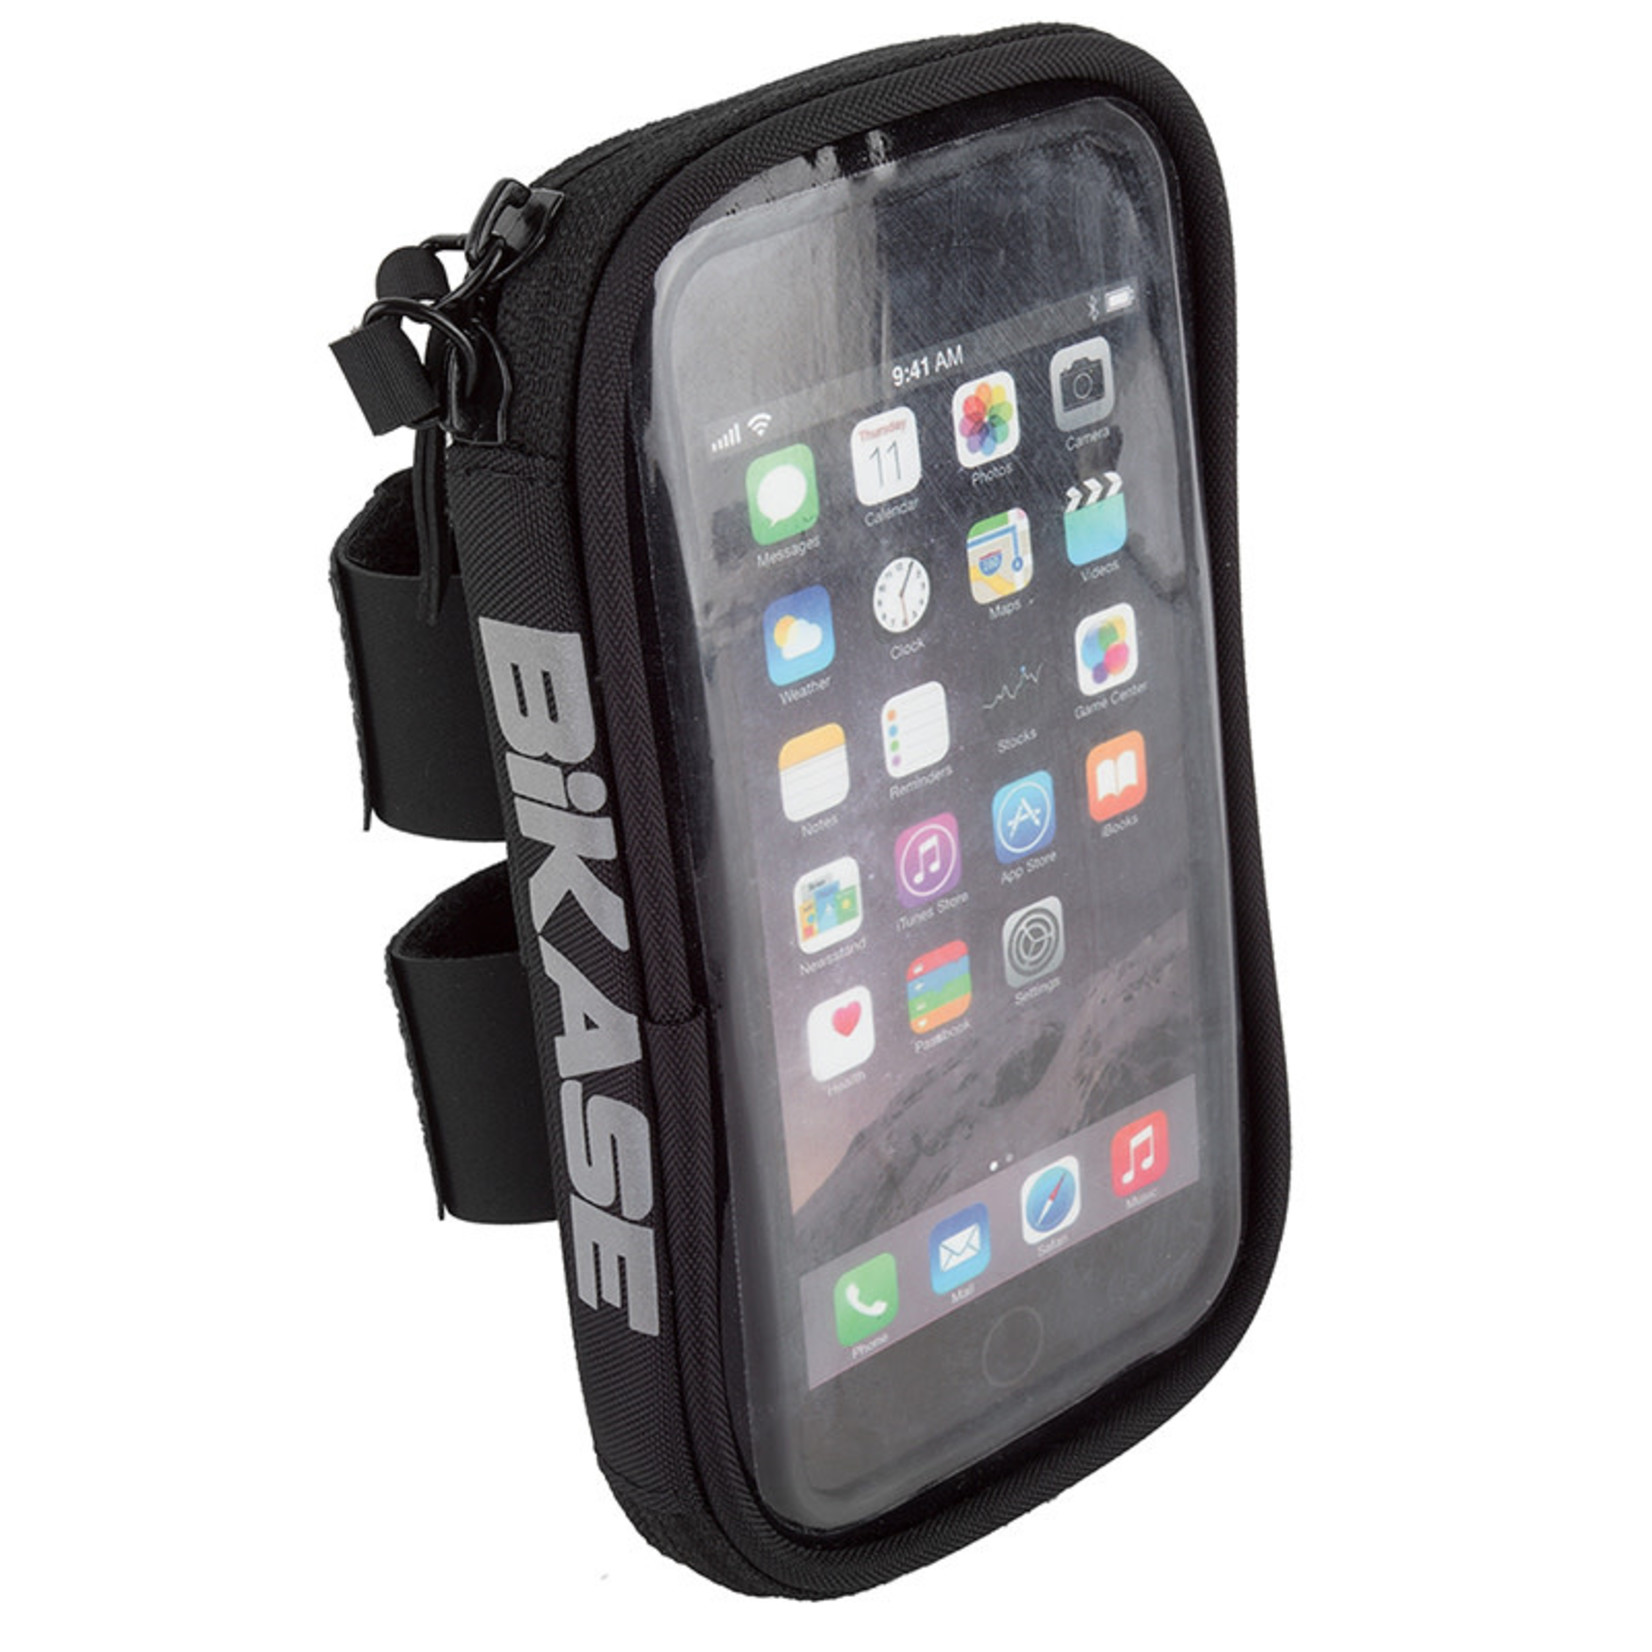 BIKASE Handy Andy 5/Handlebar Case for iphone, Android, Smartphones